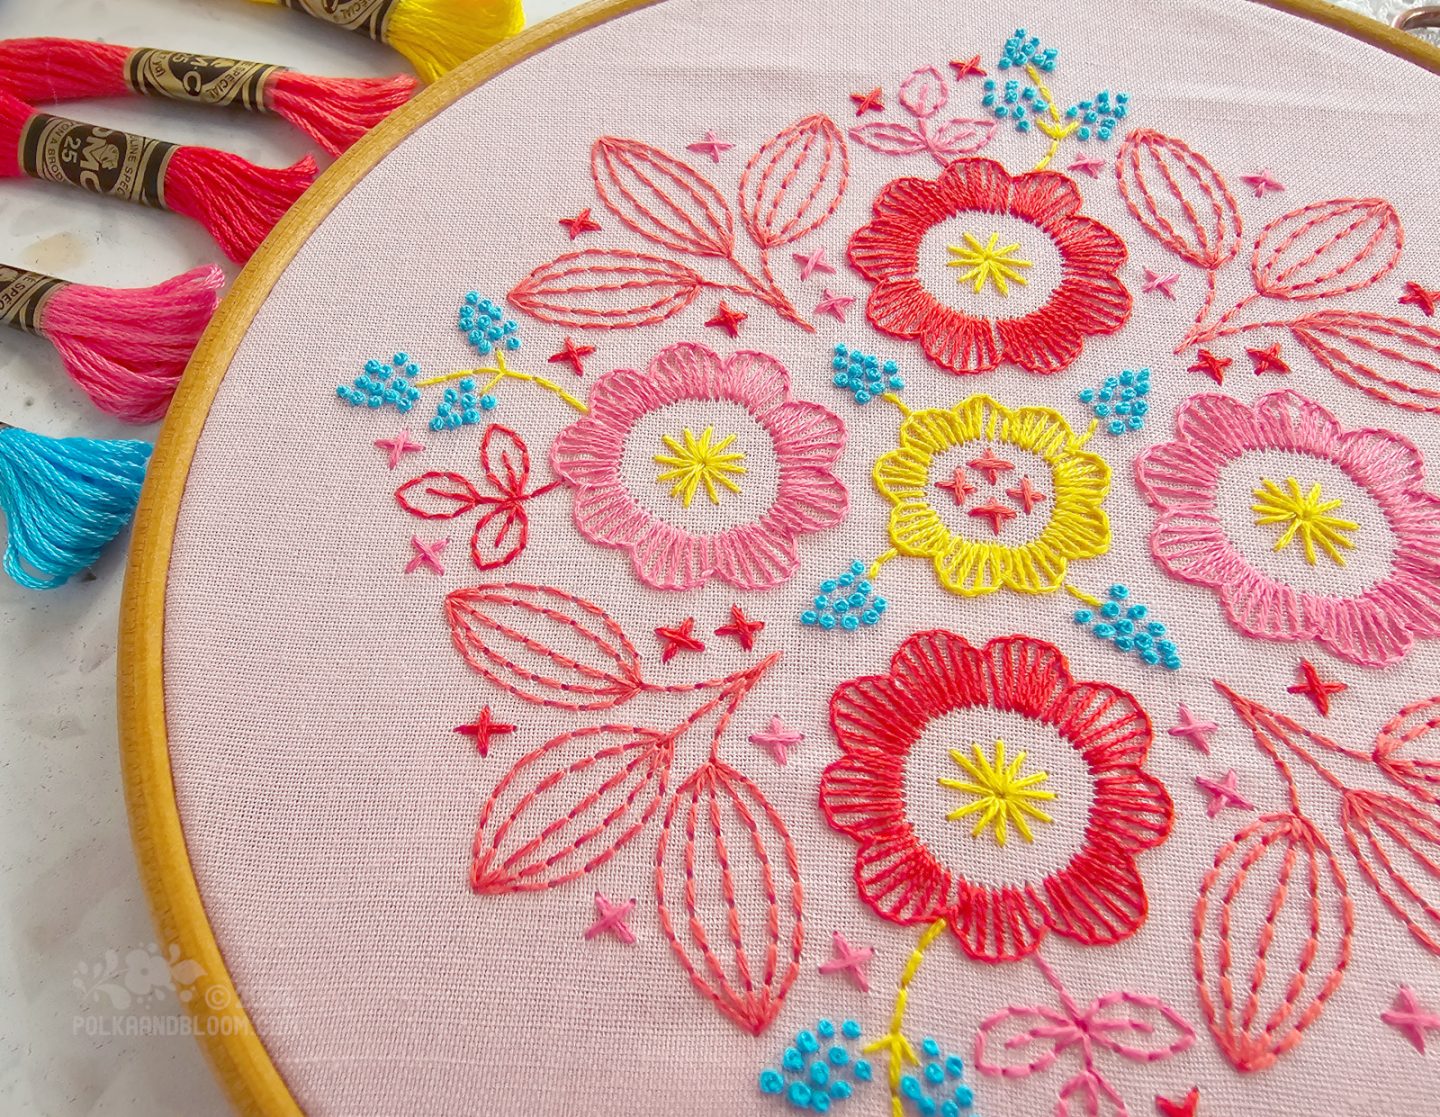 Close view of an embroidery in red, pink, turquoise and yellow colours on a pink fabric background.